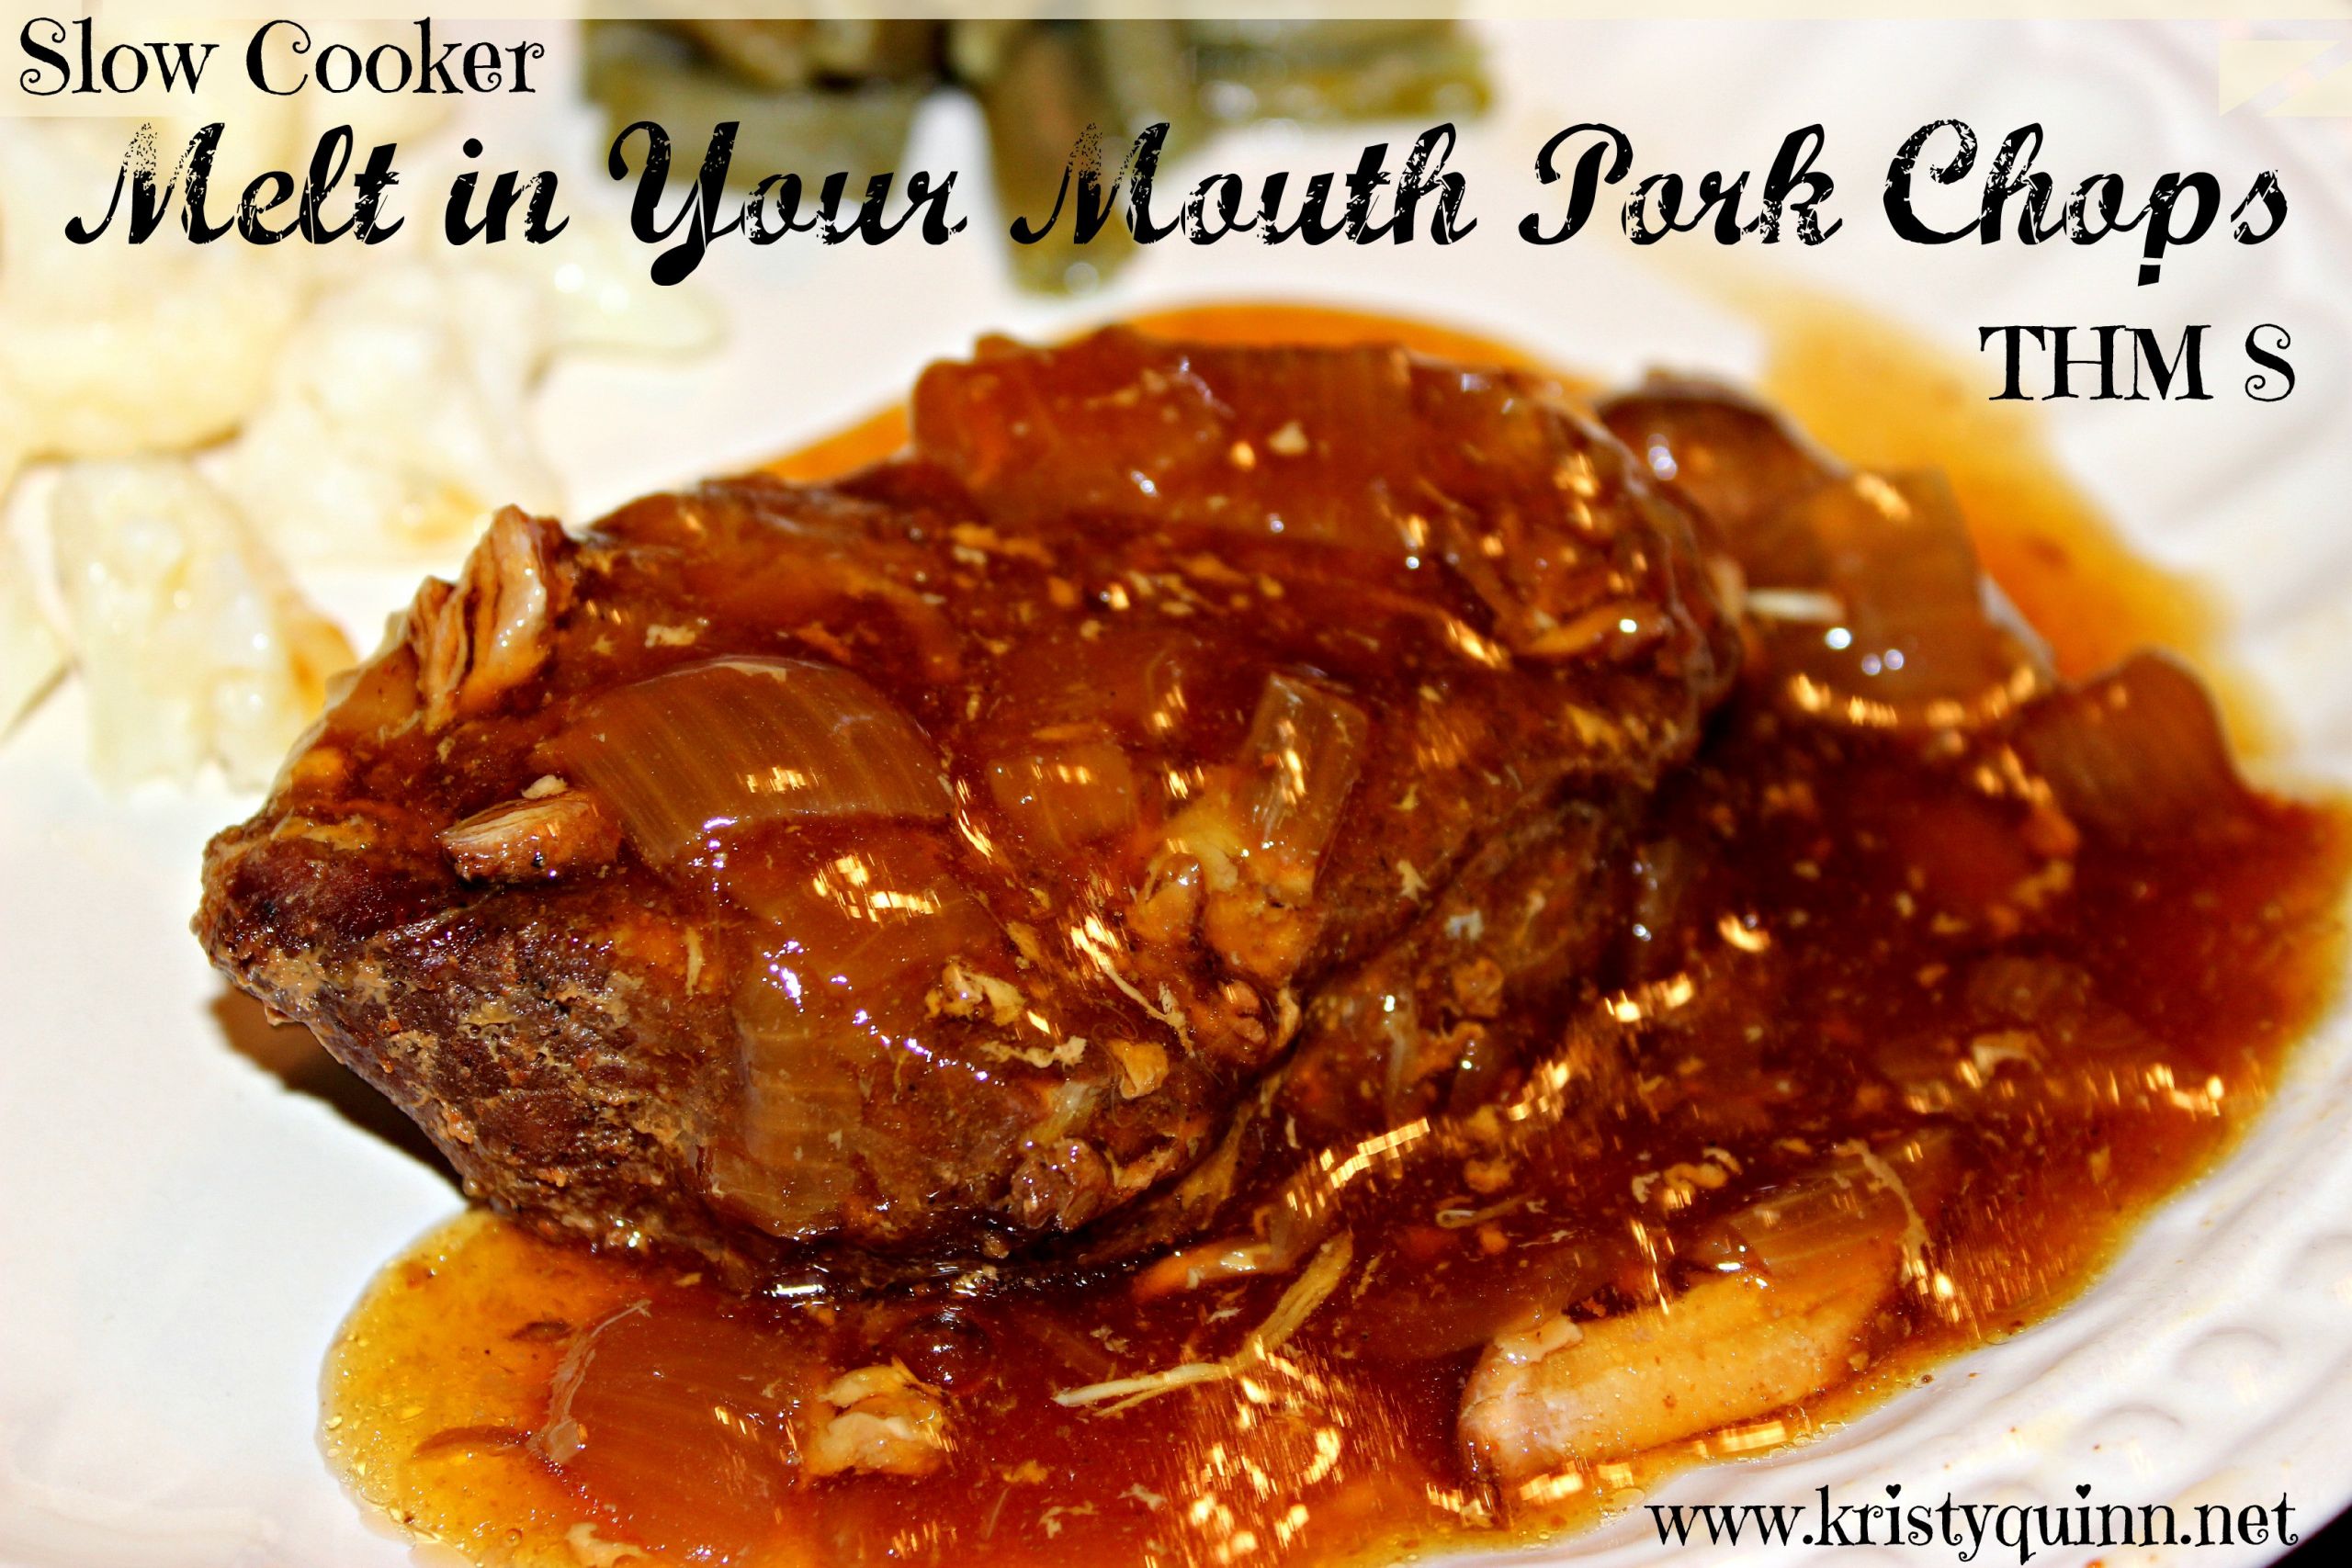 Pork Chops In Slow Cooker Recipes
 Slow Cooker Melt in Your Mouth Pork Chops THM S